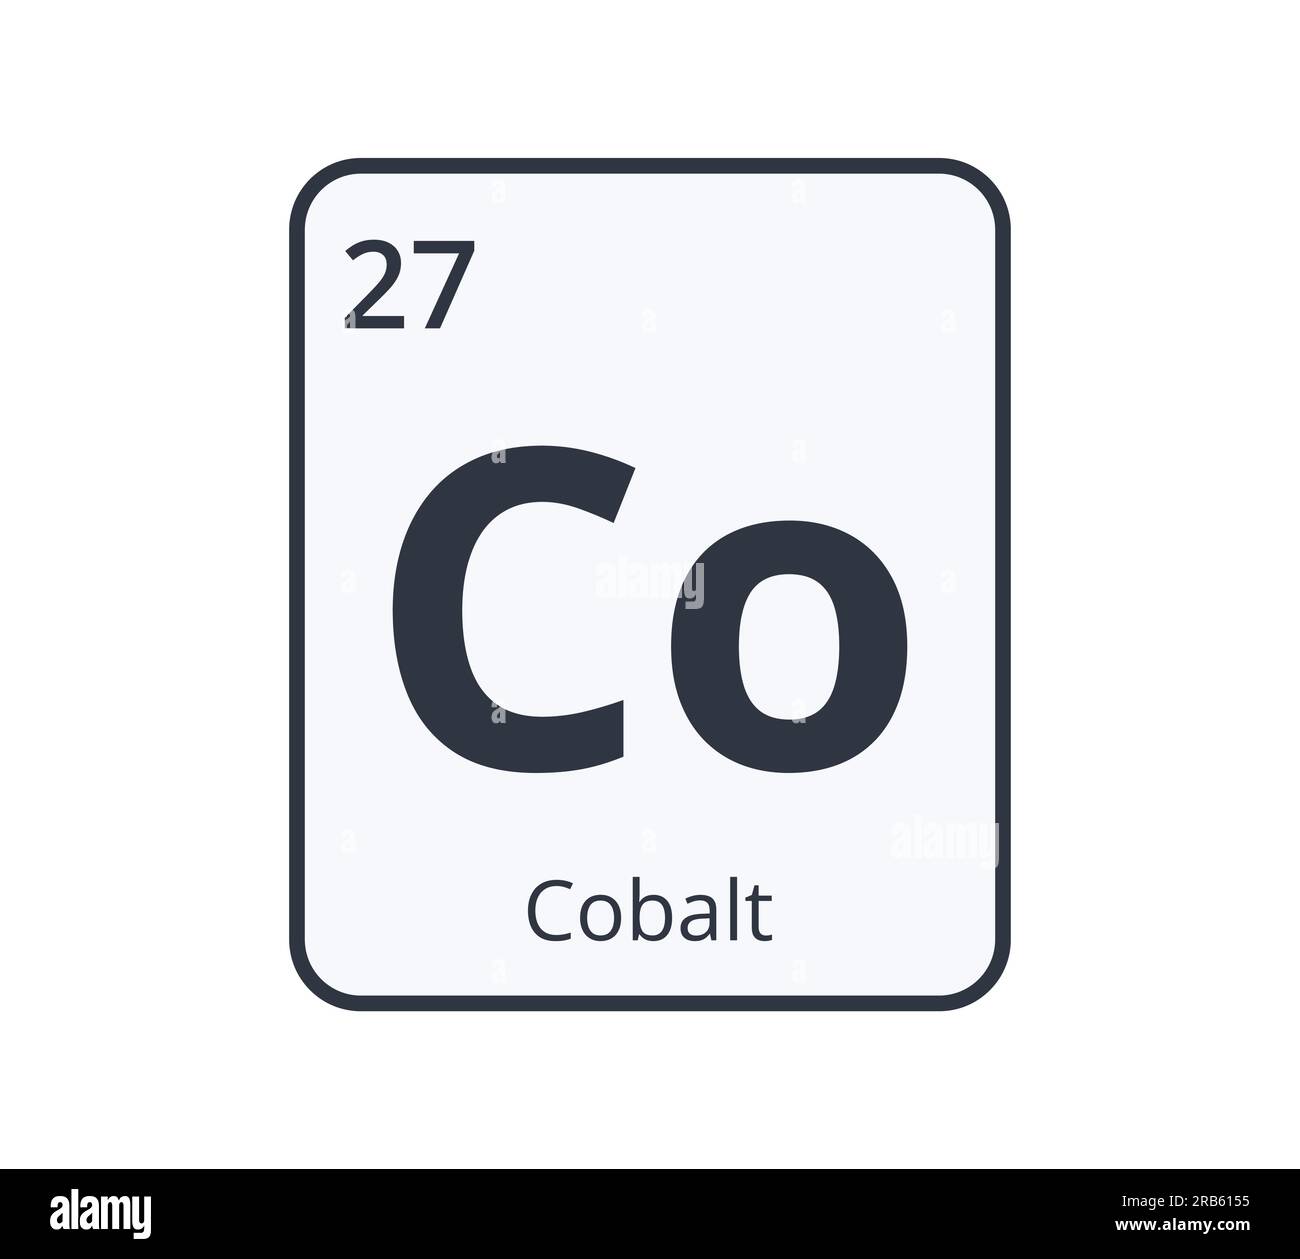 Cobalt Chemical Element Graphic for Science Designs. Stock Vector